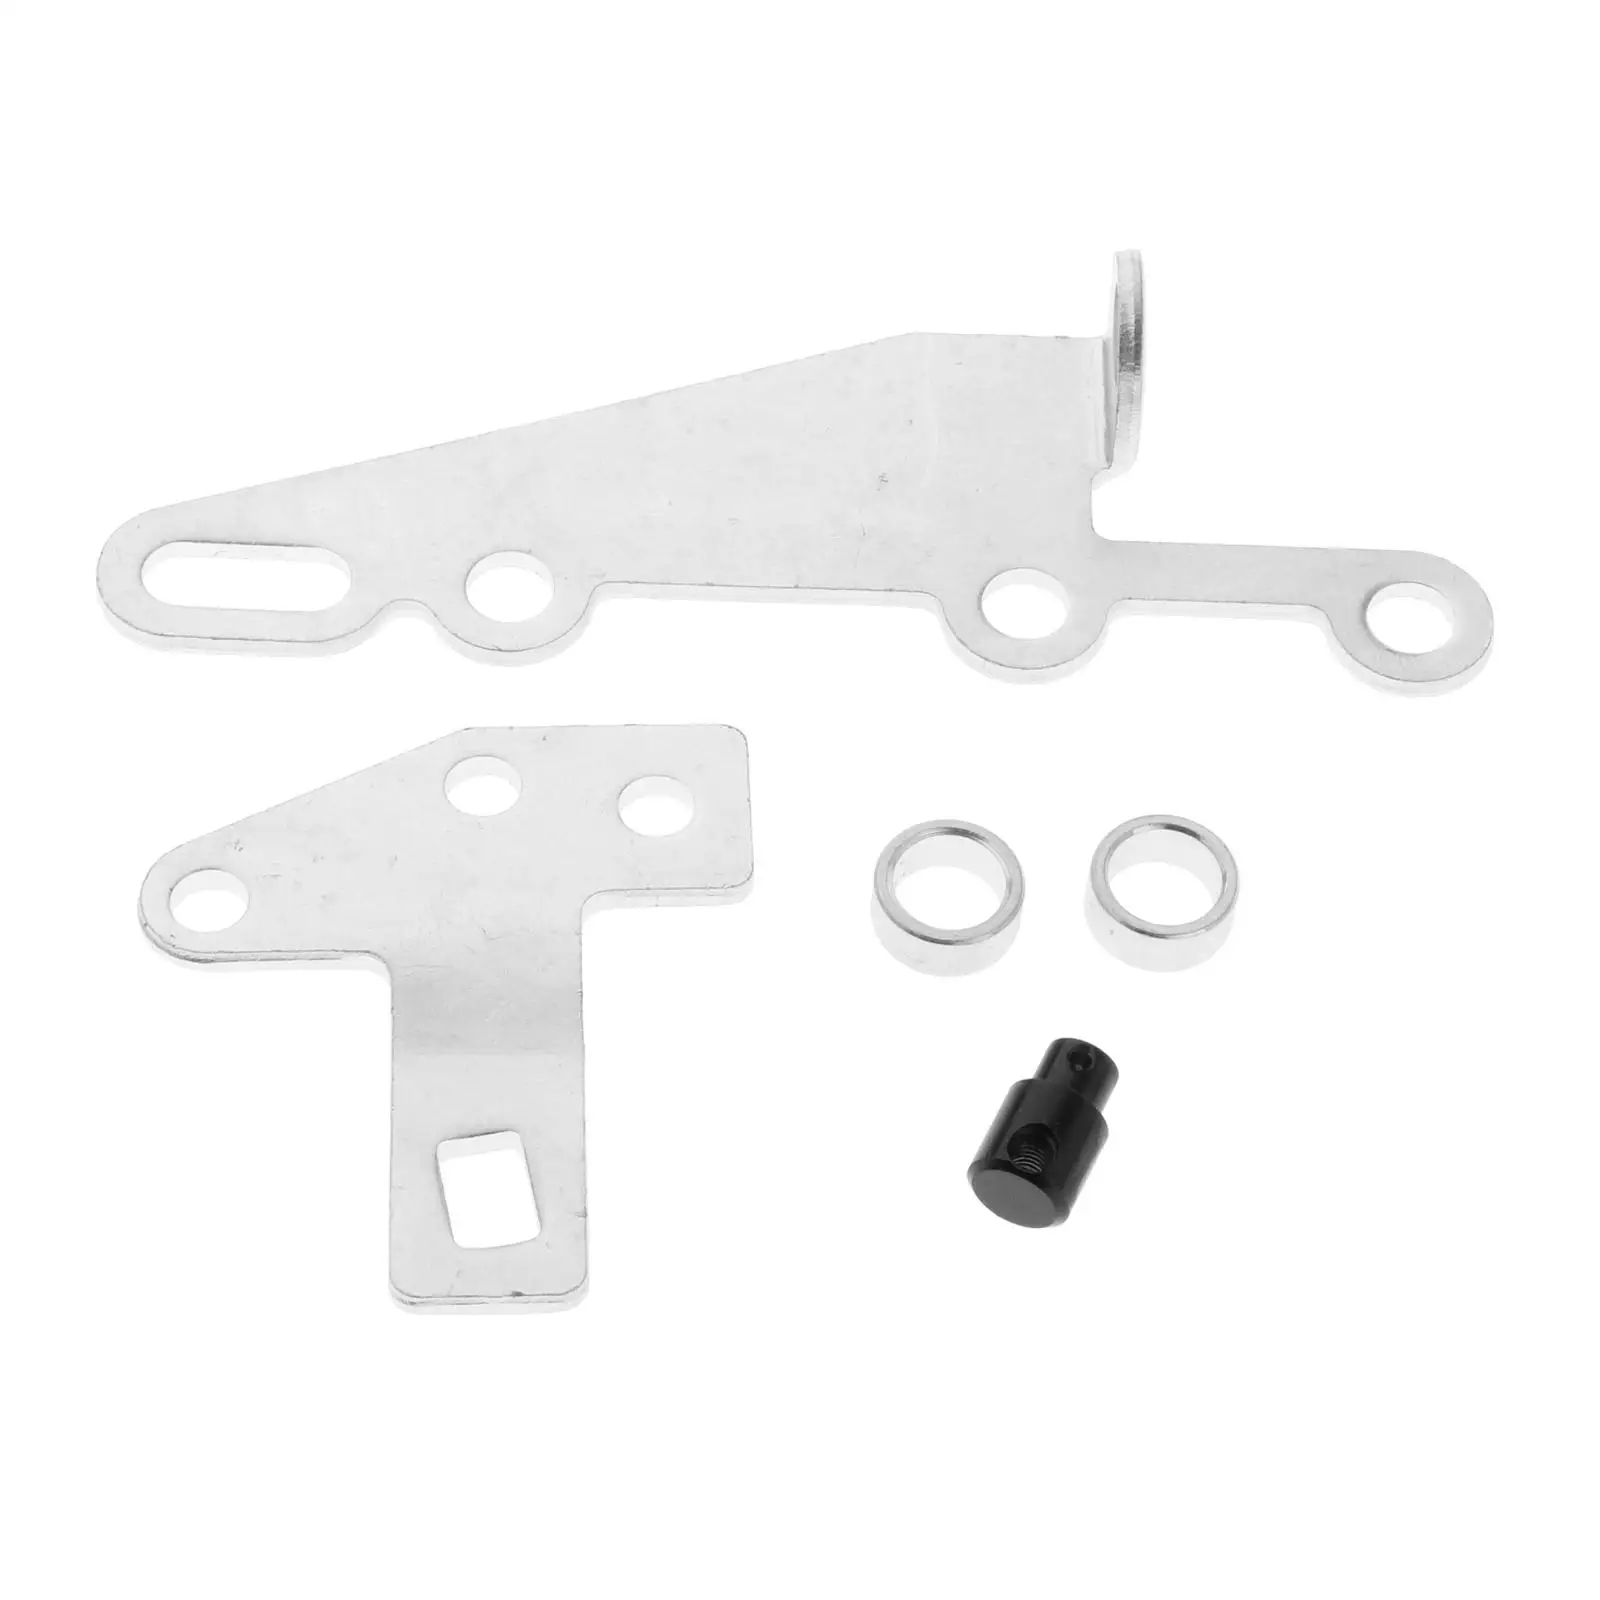 35498 Bracket & Lever Kit Replacements Fits for Turbo TH400 TH350 TH250 700R4 Automatic Transmissions